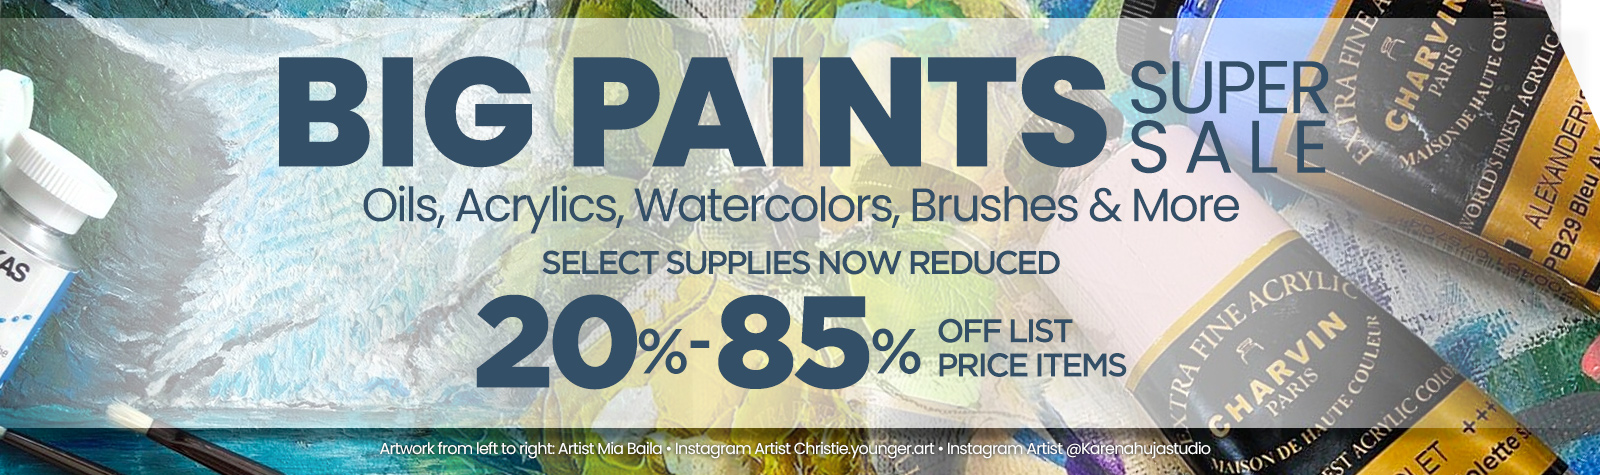 Paints Super Sale Real Savings Save More On Great Paints